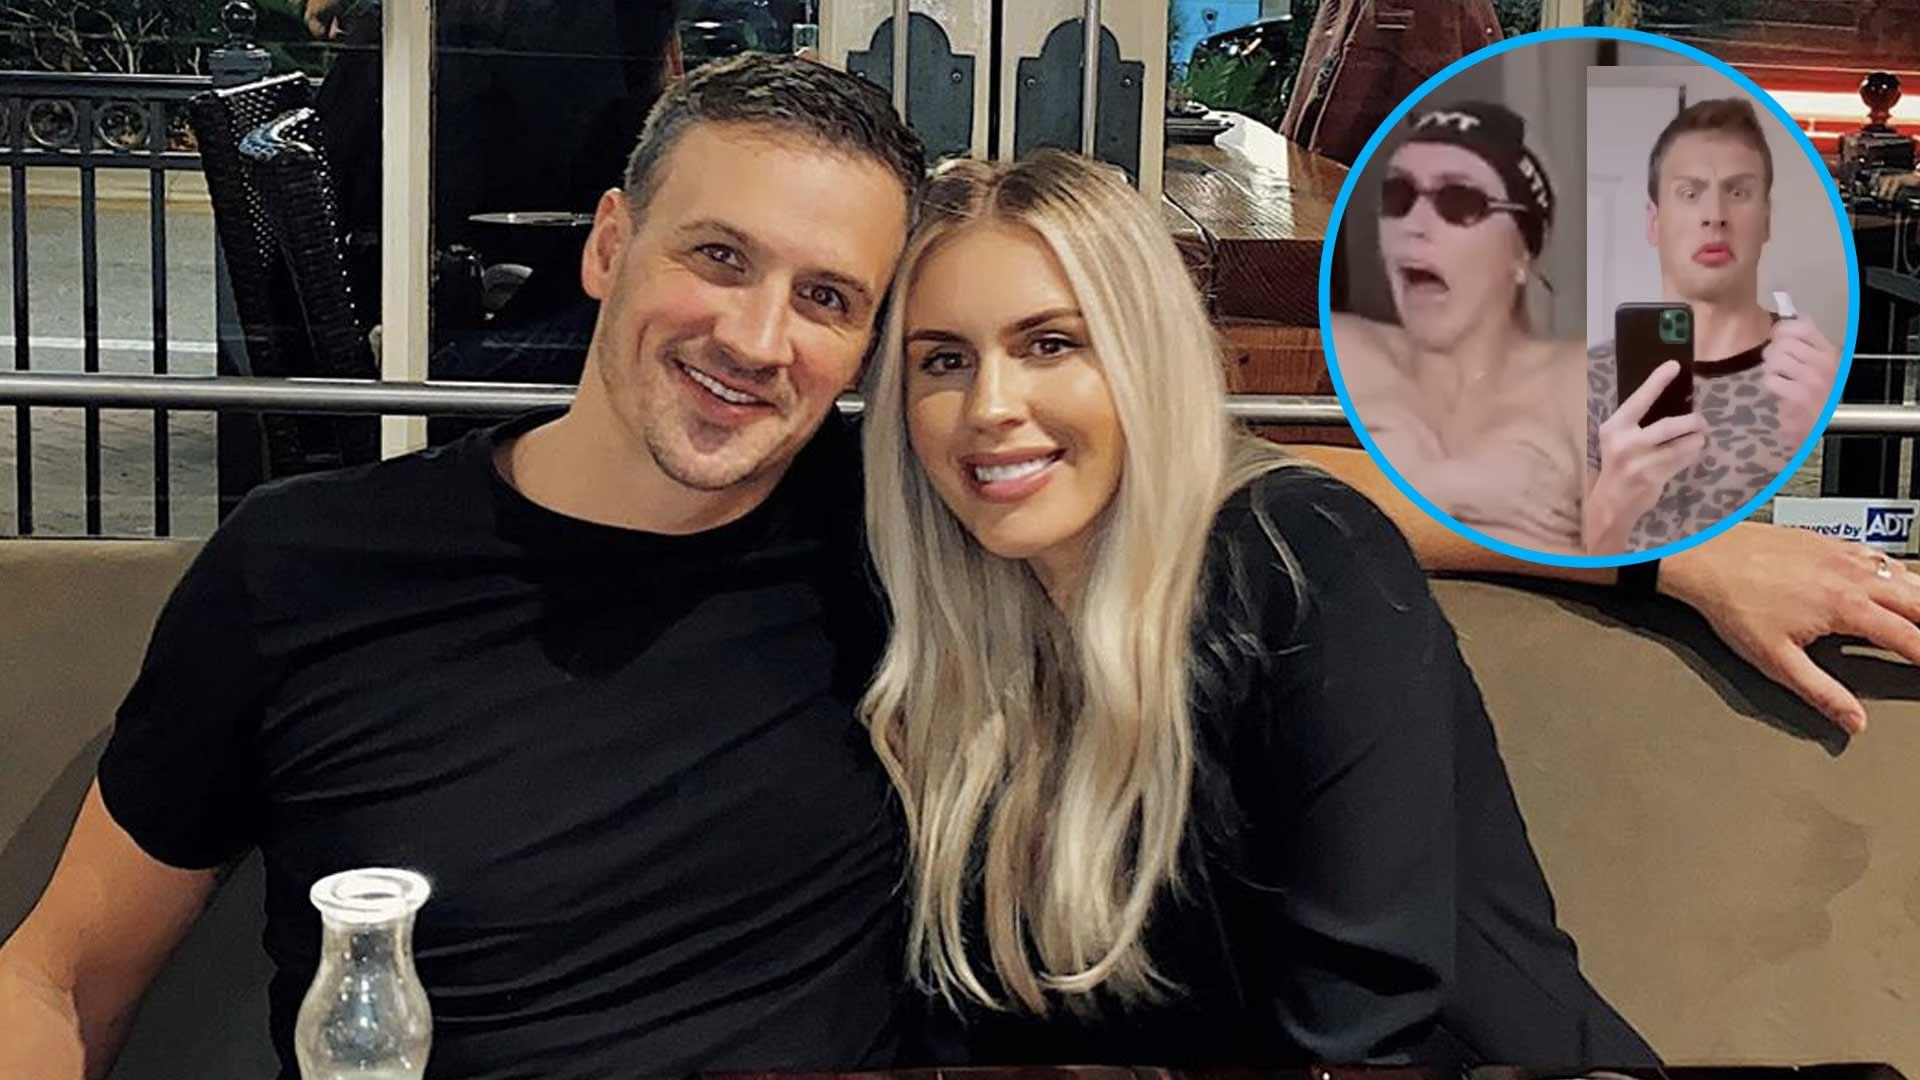 Ryan Lochte’s Wife Kayla Left With No Top While He Puts On Lipstick For Viral ‘Flip the Switch’ Challenge